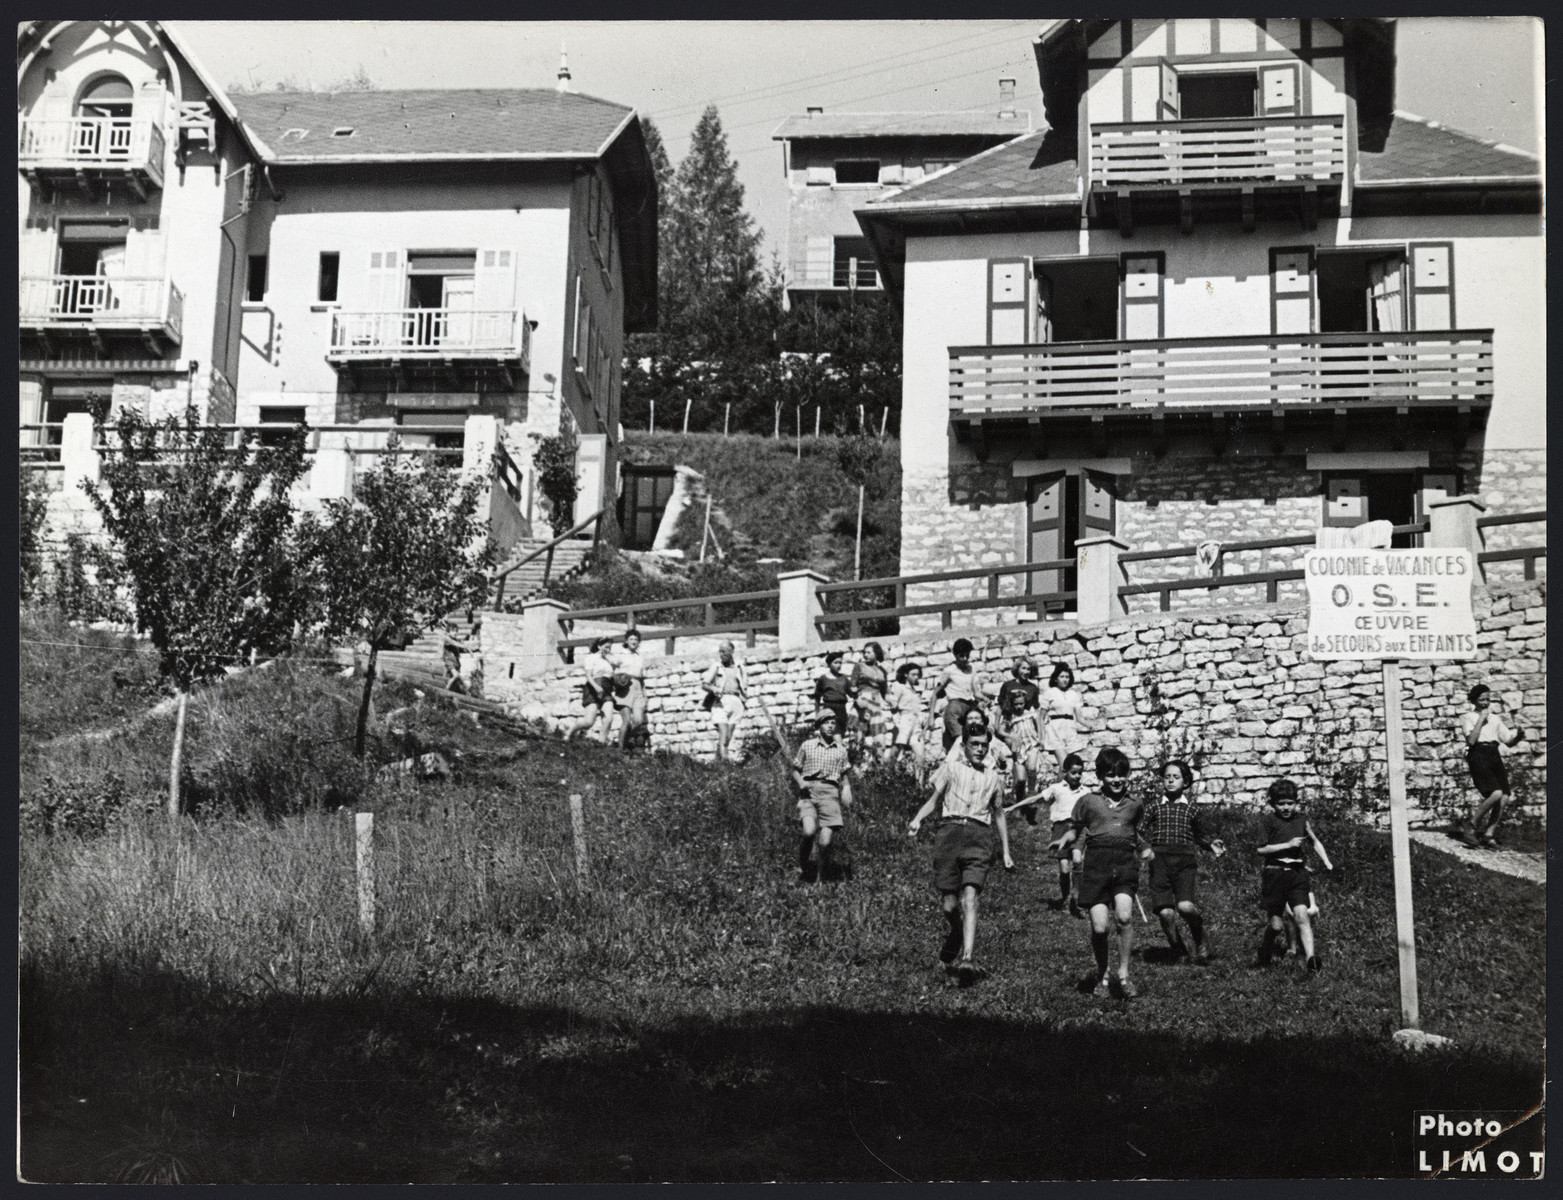 Children play outside in an OSE vacation home in Grenoble.

The original caption reads "July at the Colony in Grenoble."